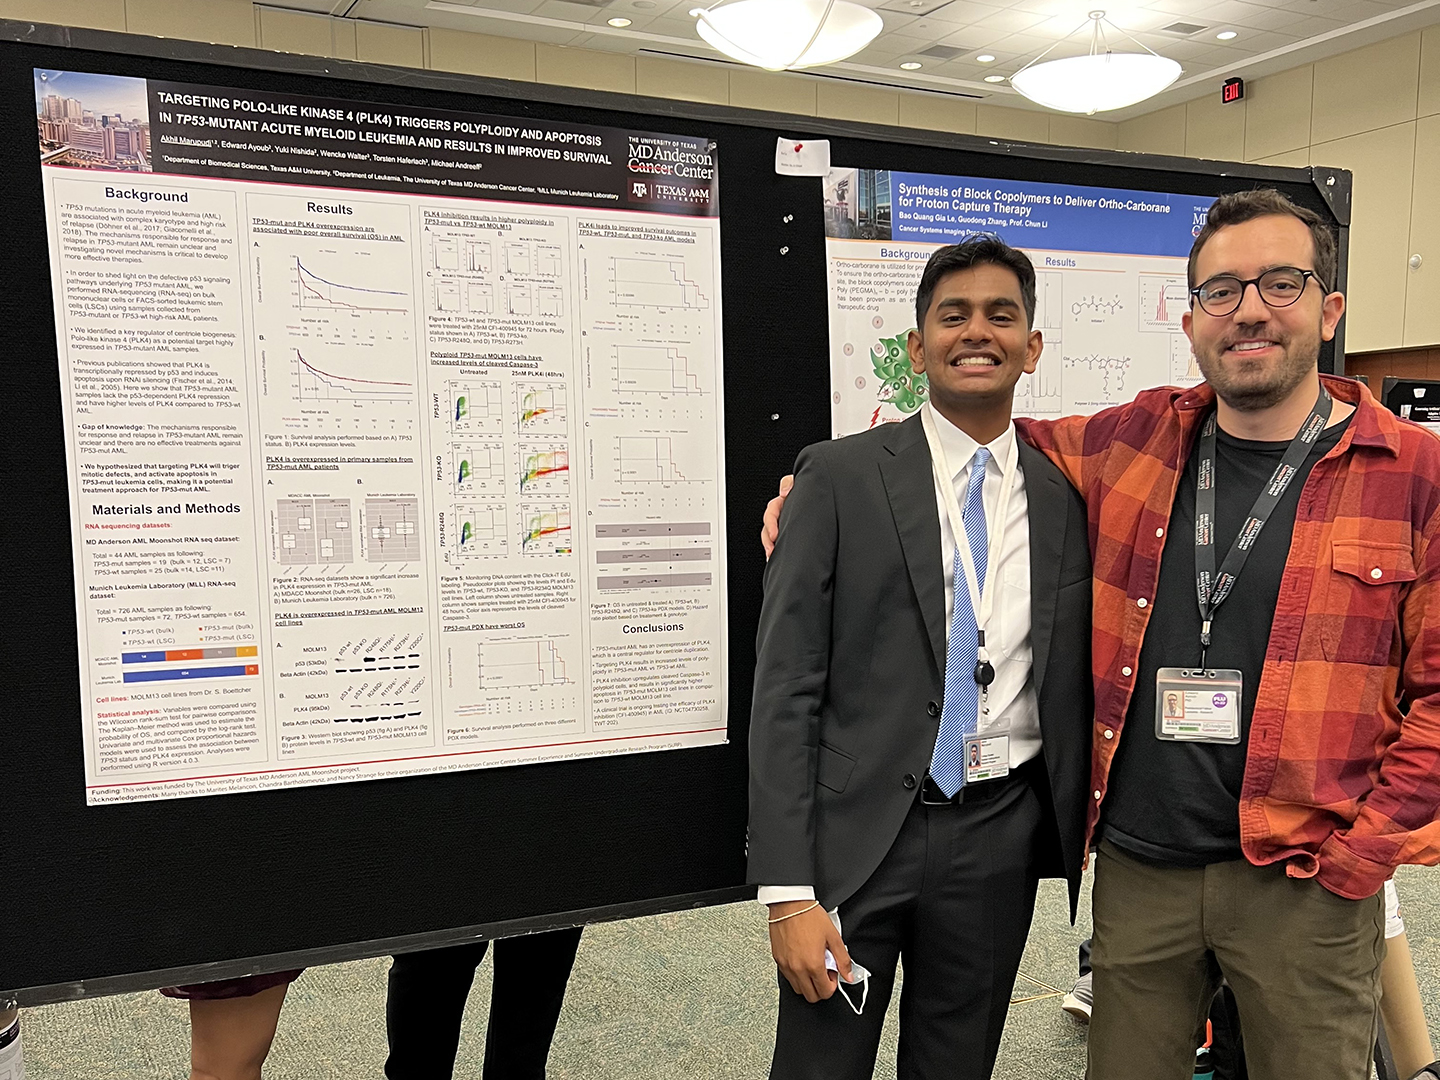 Marupudi and Ayoub next to their poster